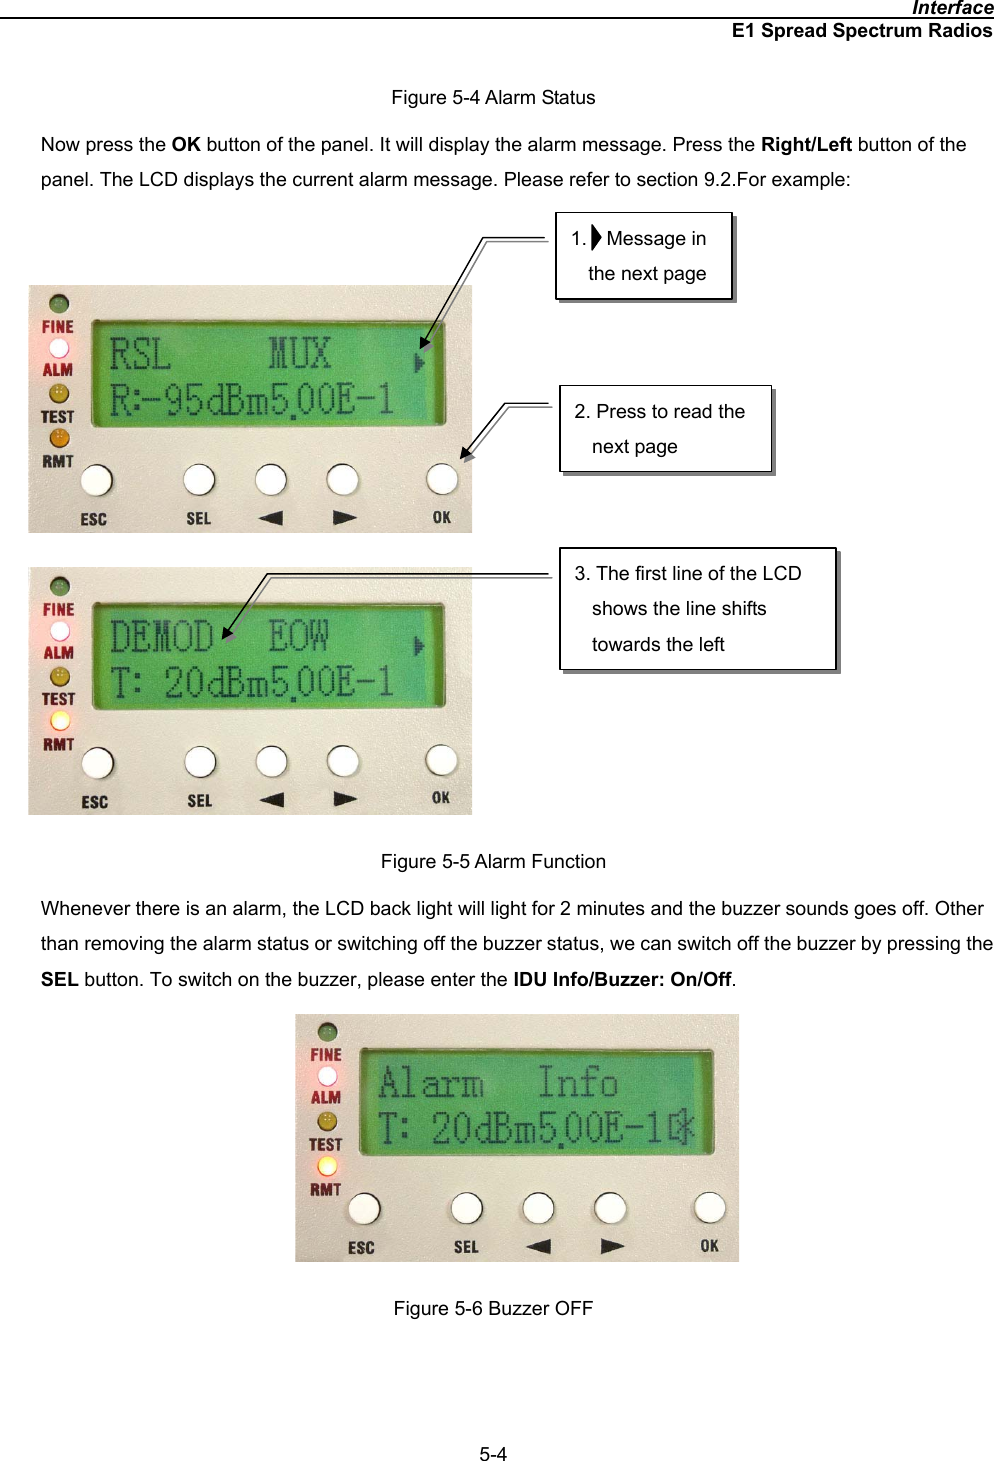                                                                                              InterfaceE1 Spread Spectrum Radios5-4Figure 5-4 Alarm Status Now press the OK button of the panel. It will display the alarm message. Press the Right/Left button of the panel. The LCD displays the current alarm message. Please refer to section 9.2.For example:      Figure 5-5 Alarm Function Whenever there is an alarm, the LCD back light will light for 2 minutes and the buzzer sounds goes off. Other than removing the alarm status or switching off the buzzer status, we can switch off the buzzer by pressing the SEL button. To switch on the buzzer, please enter the IDU Info/Buzzer: On/Off.Figure 5-6 Buzzer OFF 1.  Message in the next page 2. Press to read the next page 3. The first line of the LCD shows the line shifts towards the left 